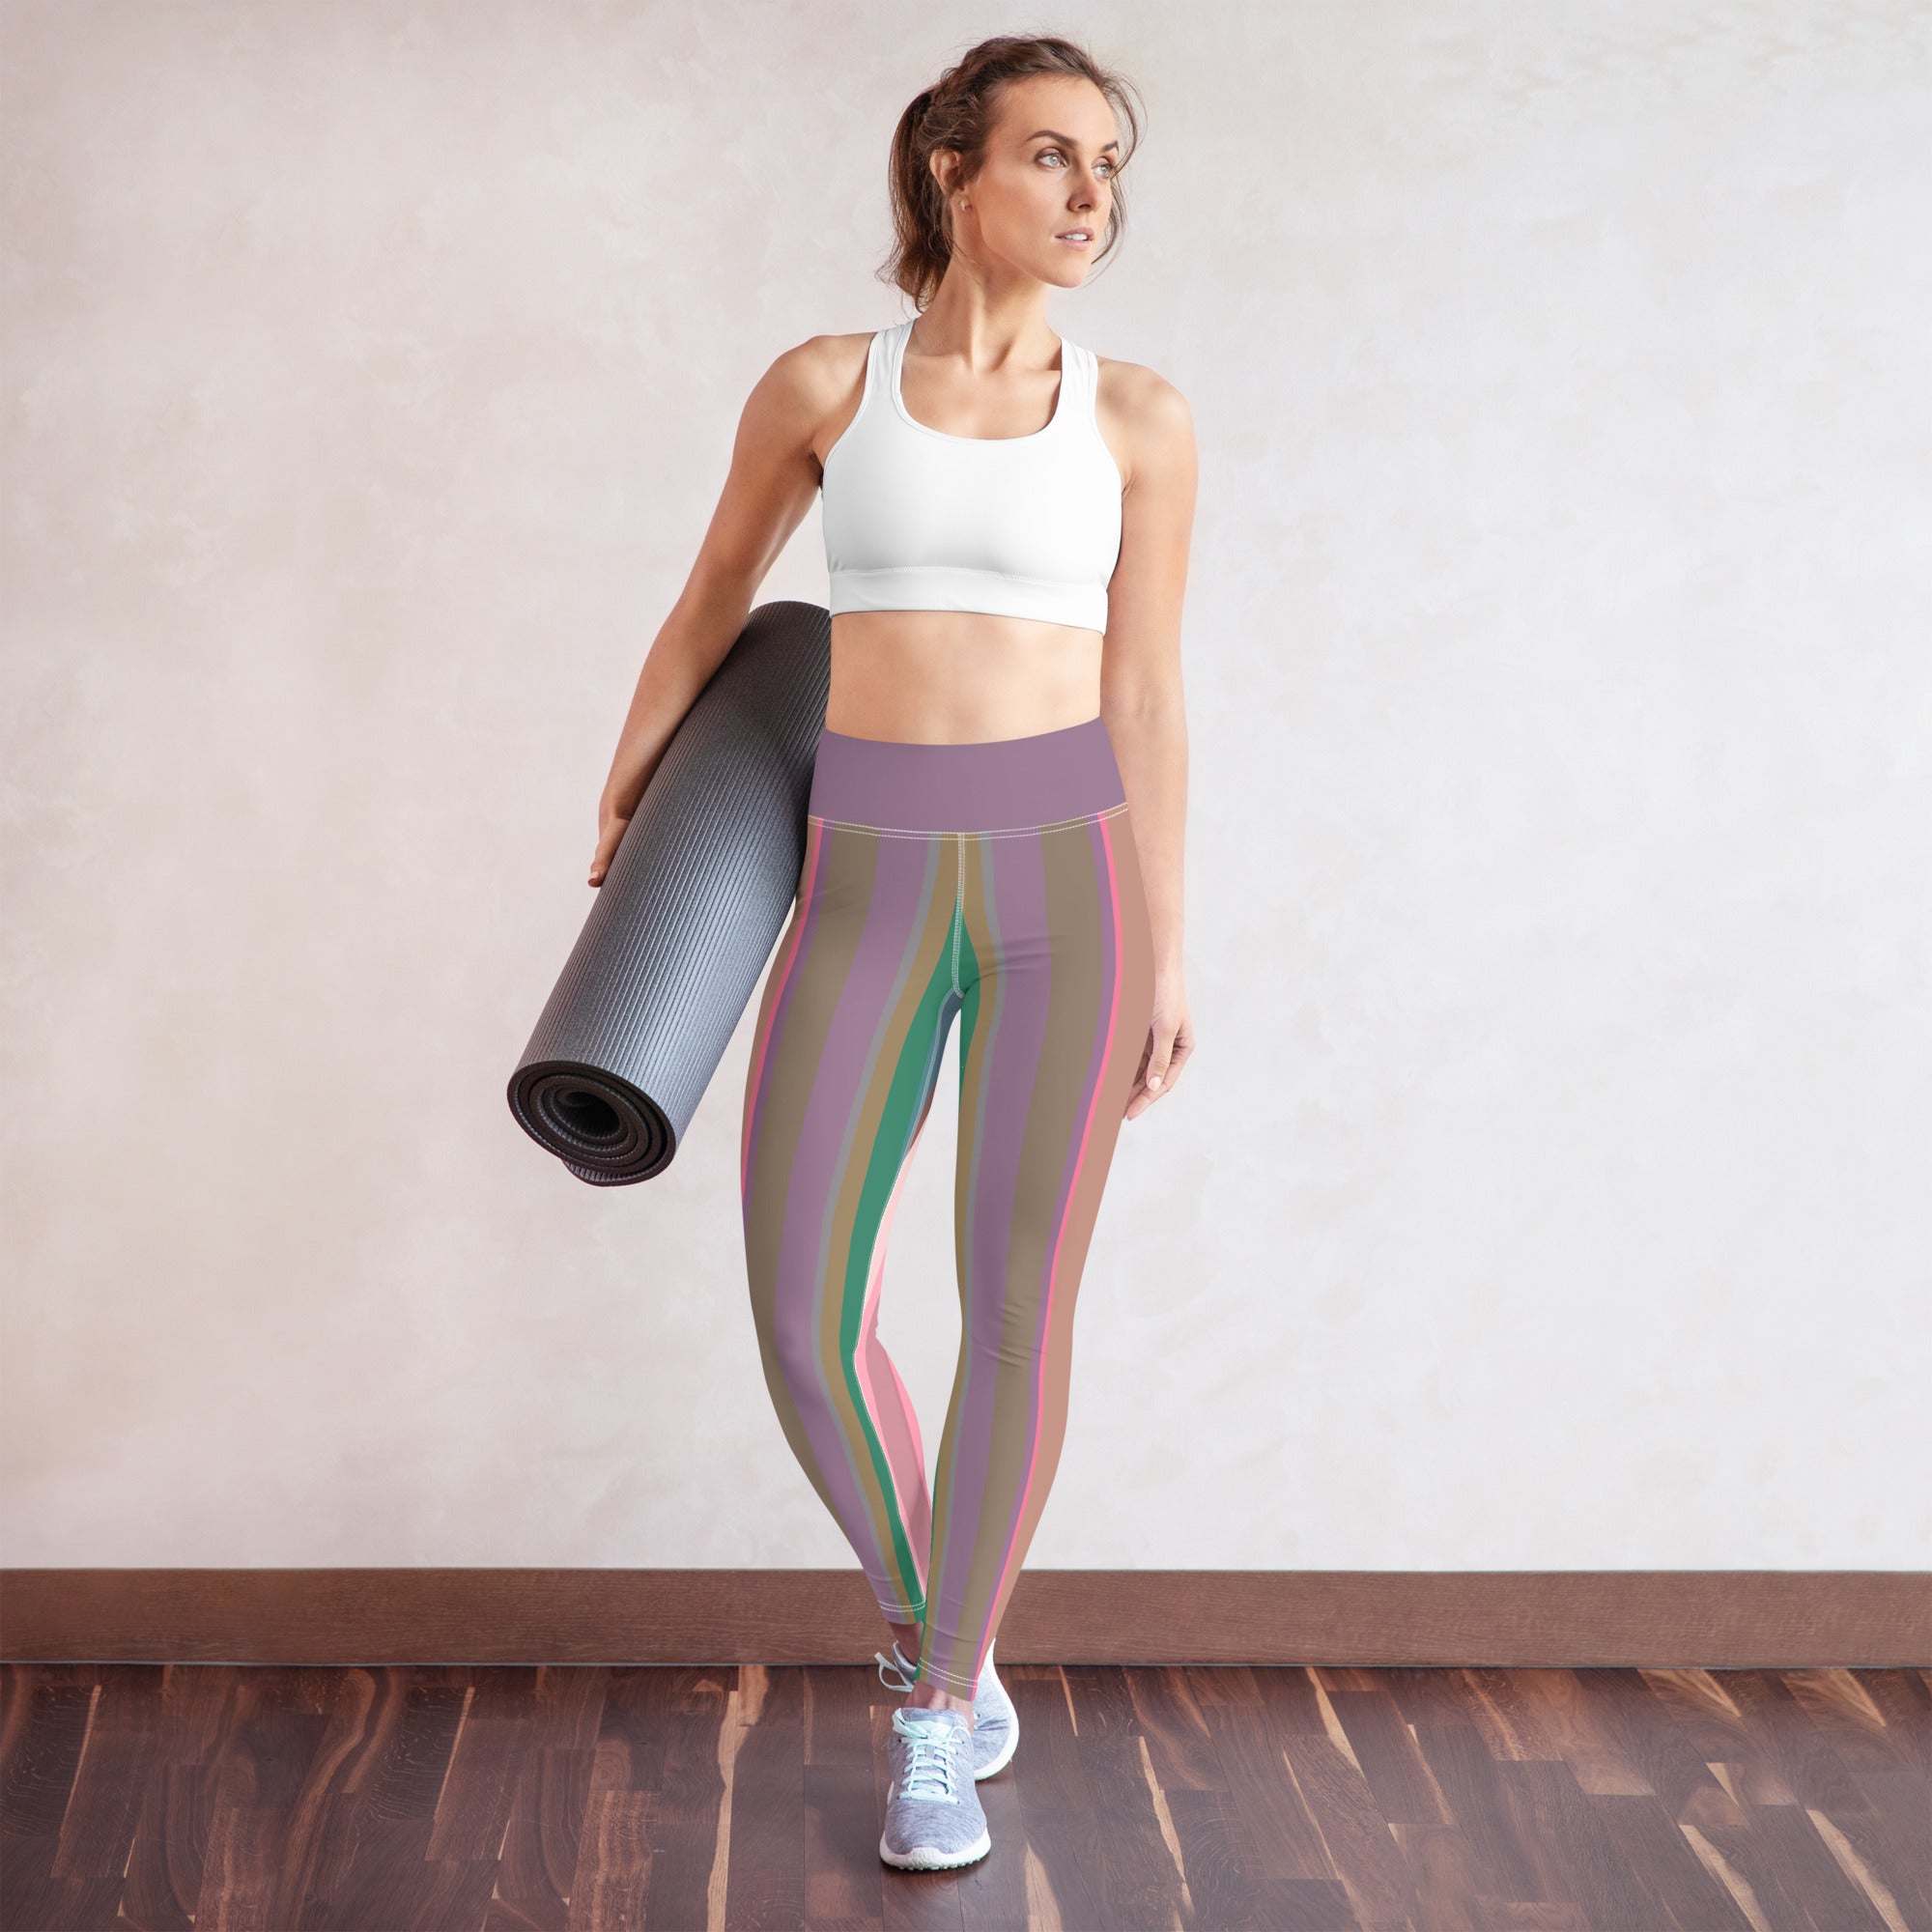 Vibrant Mosaic Yoga Leggings with a dynamic, colorful pattern for an energetic yoga session.